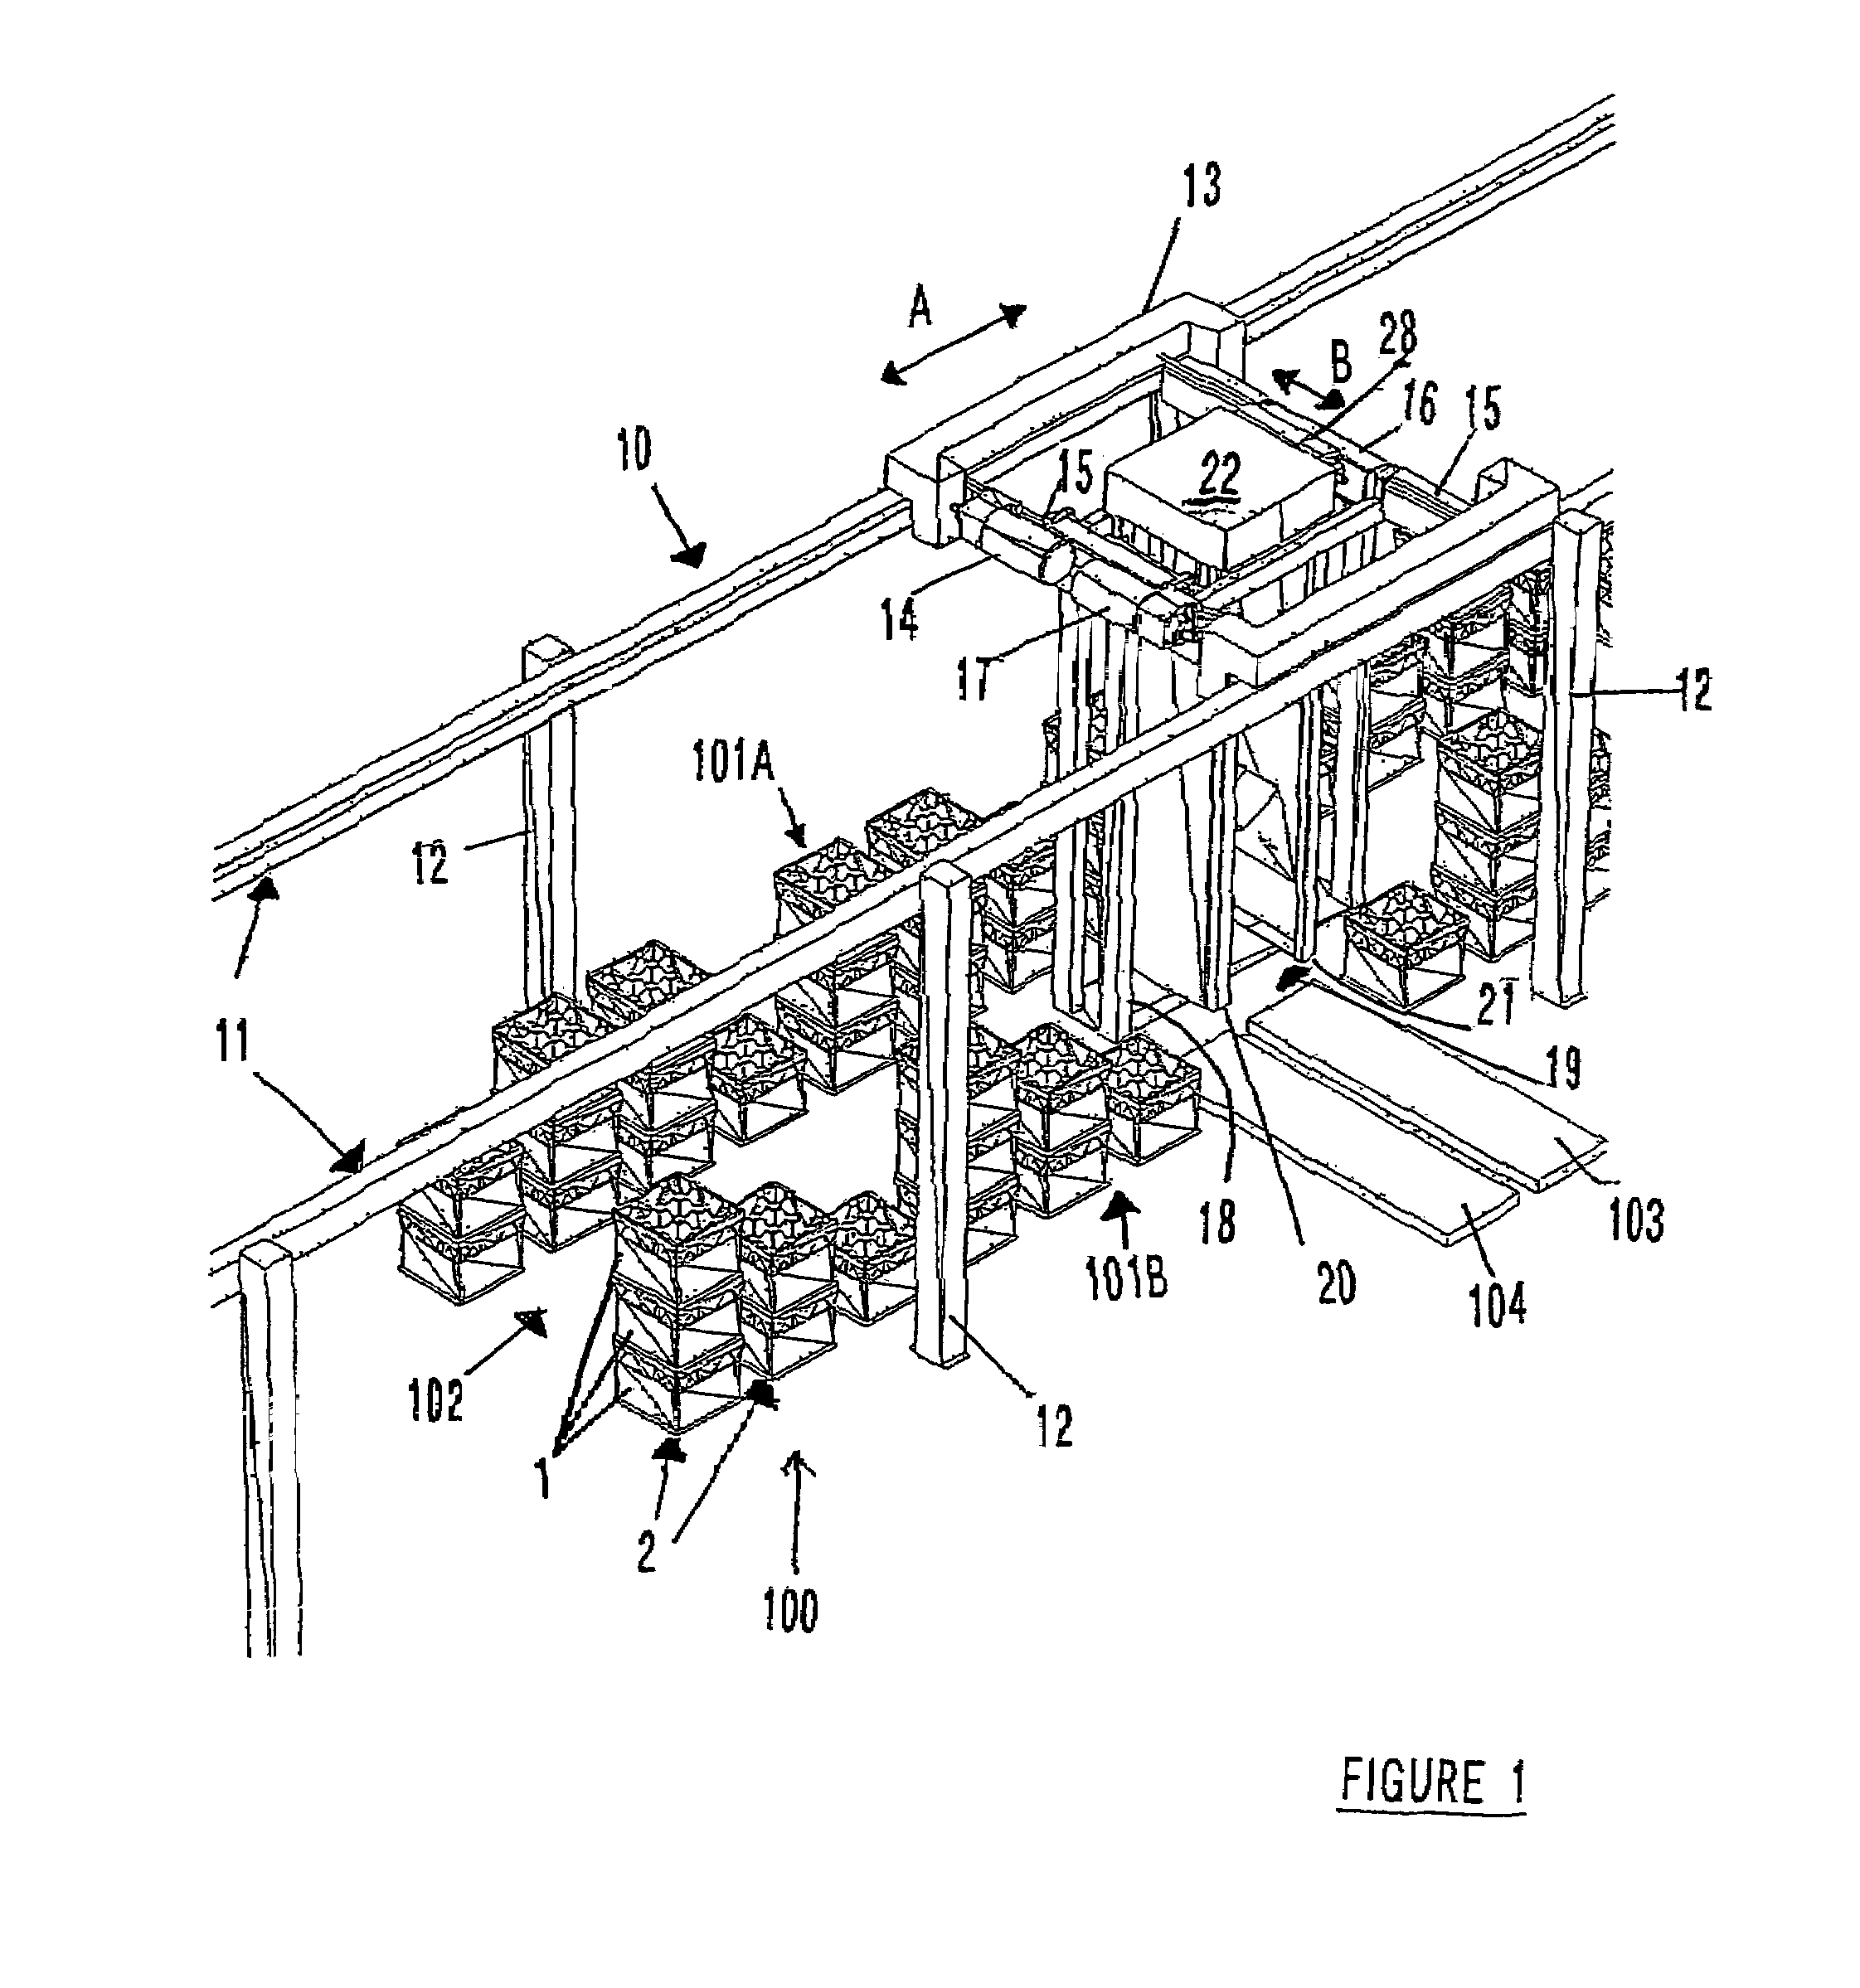 Apparatus for transporting containers